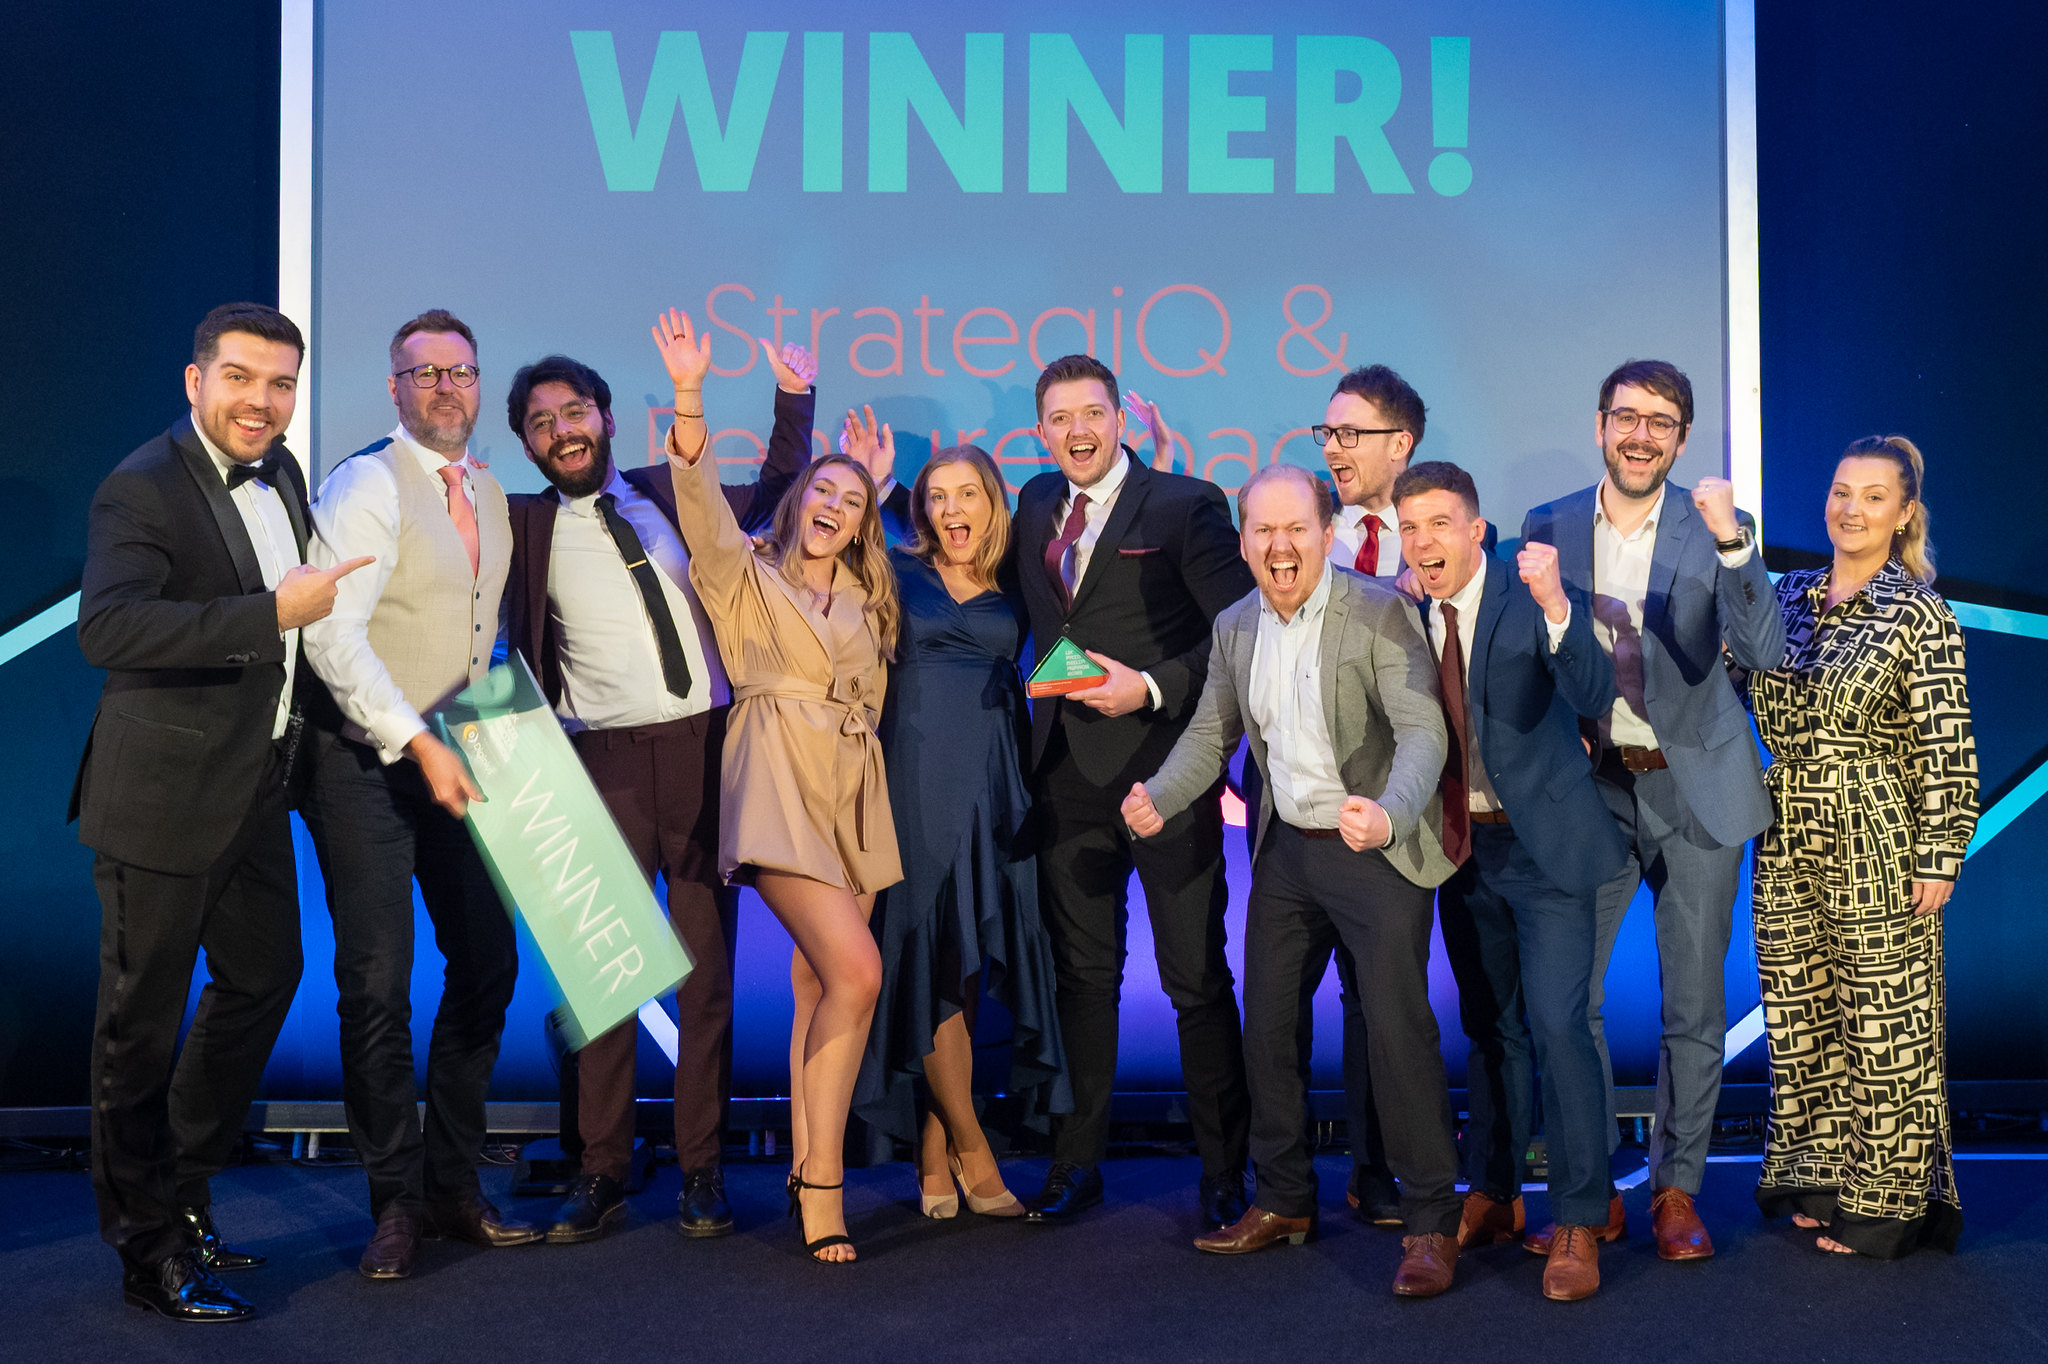 Image: StrategiQ – Digital Growth Award would be the ‘pinnacle of our client’s success’